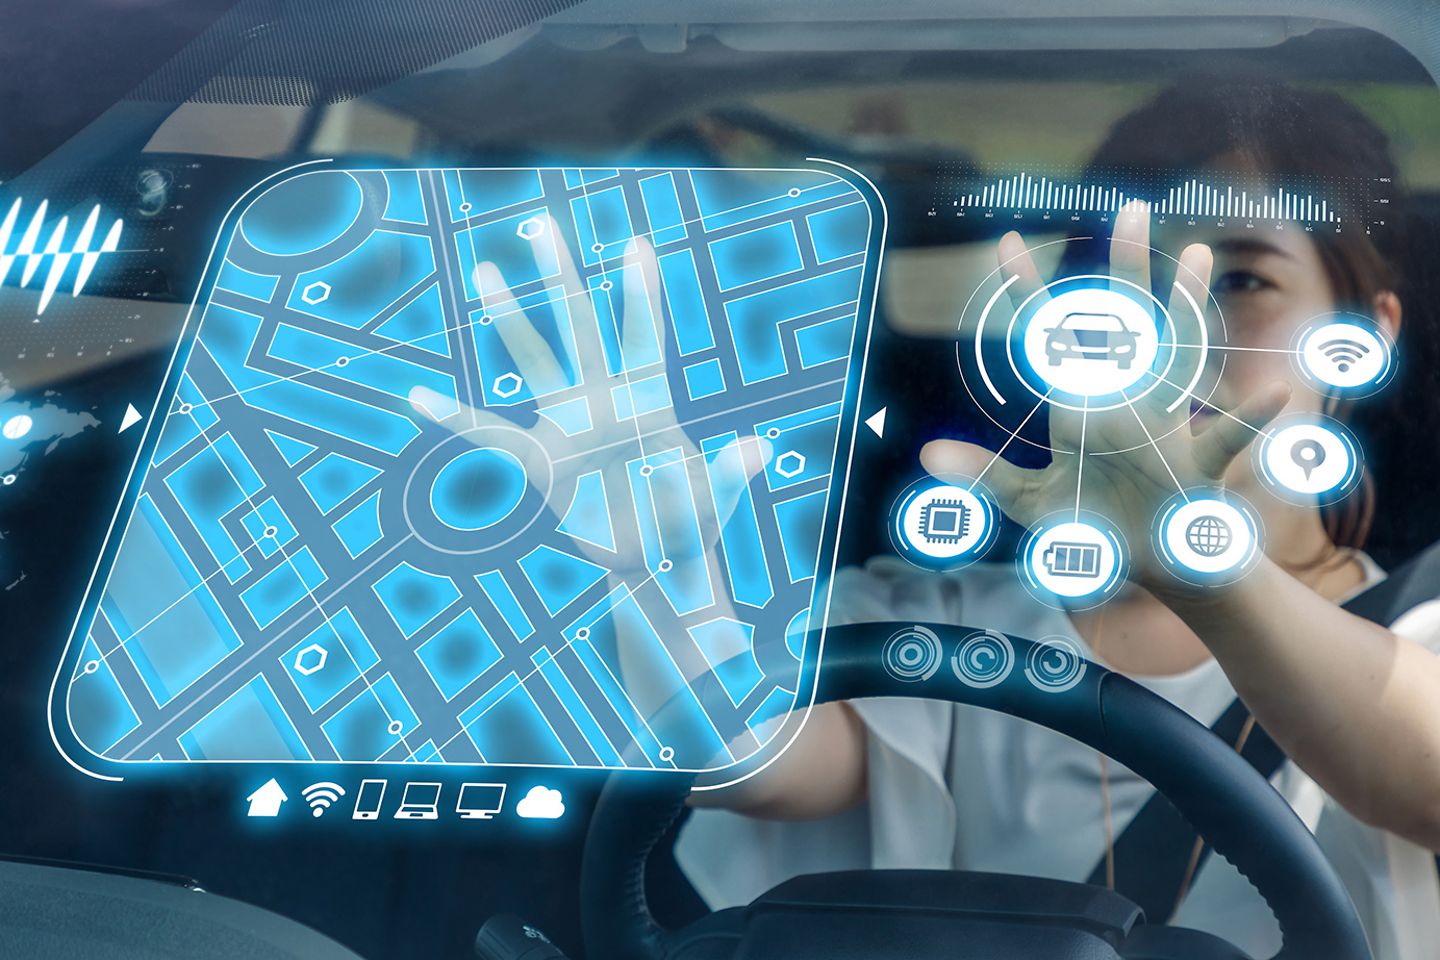 Heads up Display (HUD) of vehicle. Graphical User Interface (GUI). Futuristic car 